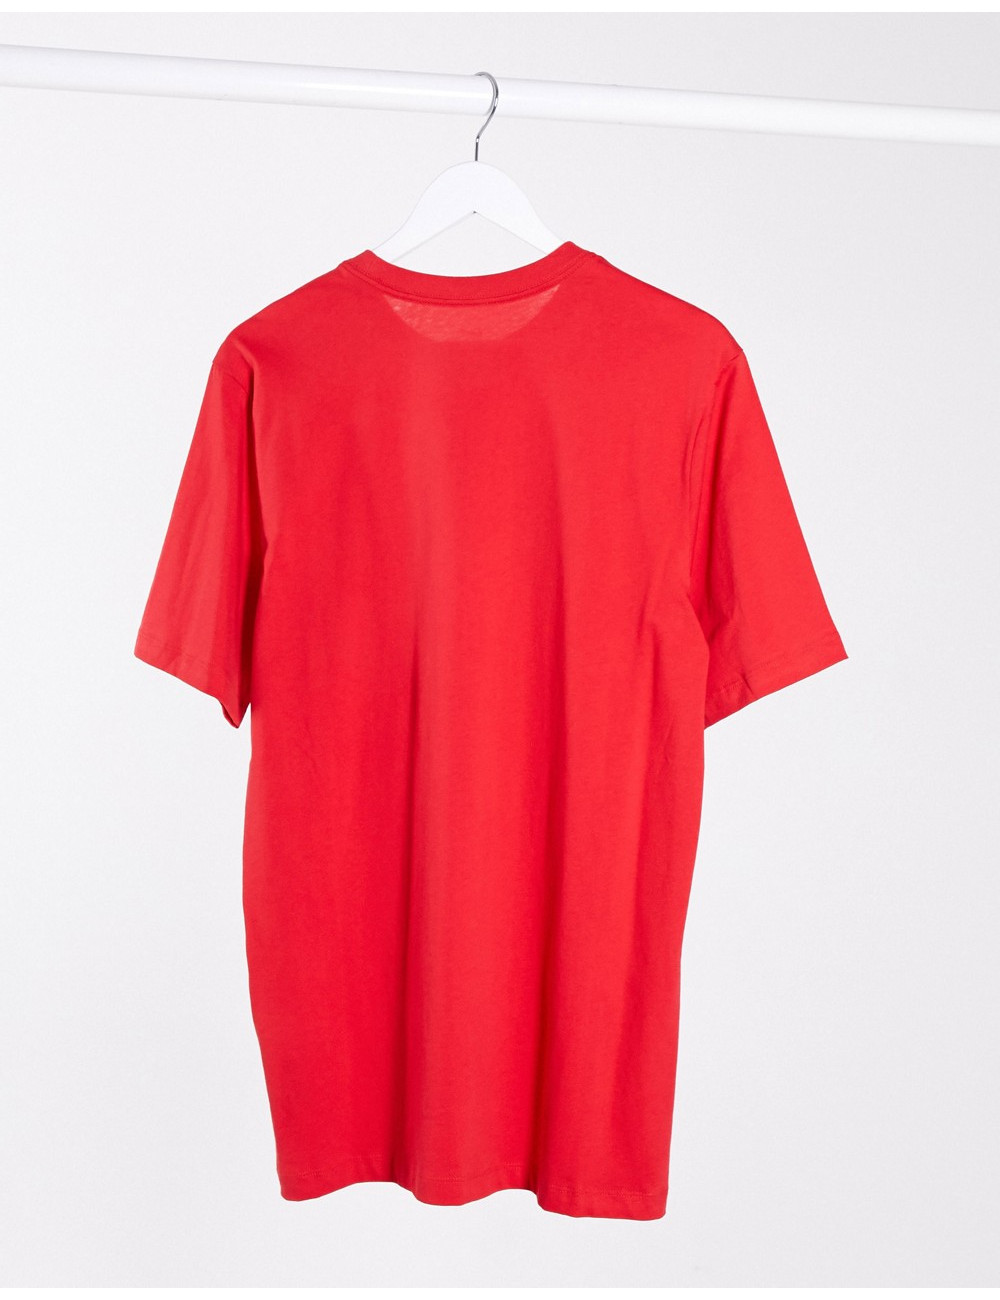 Nike Tall club t-shirt in red